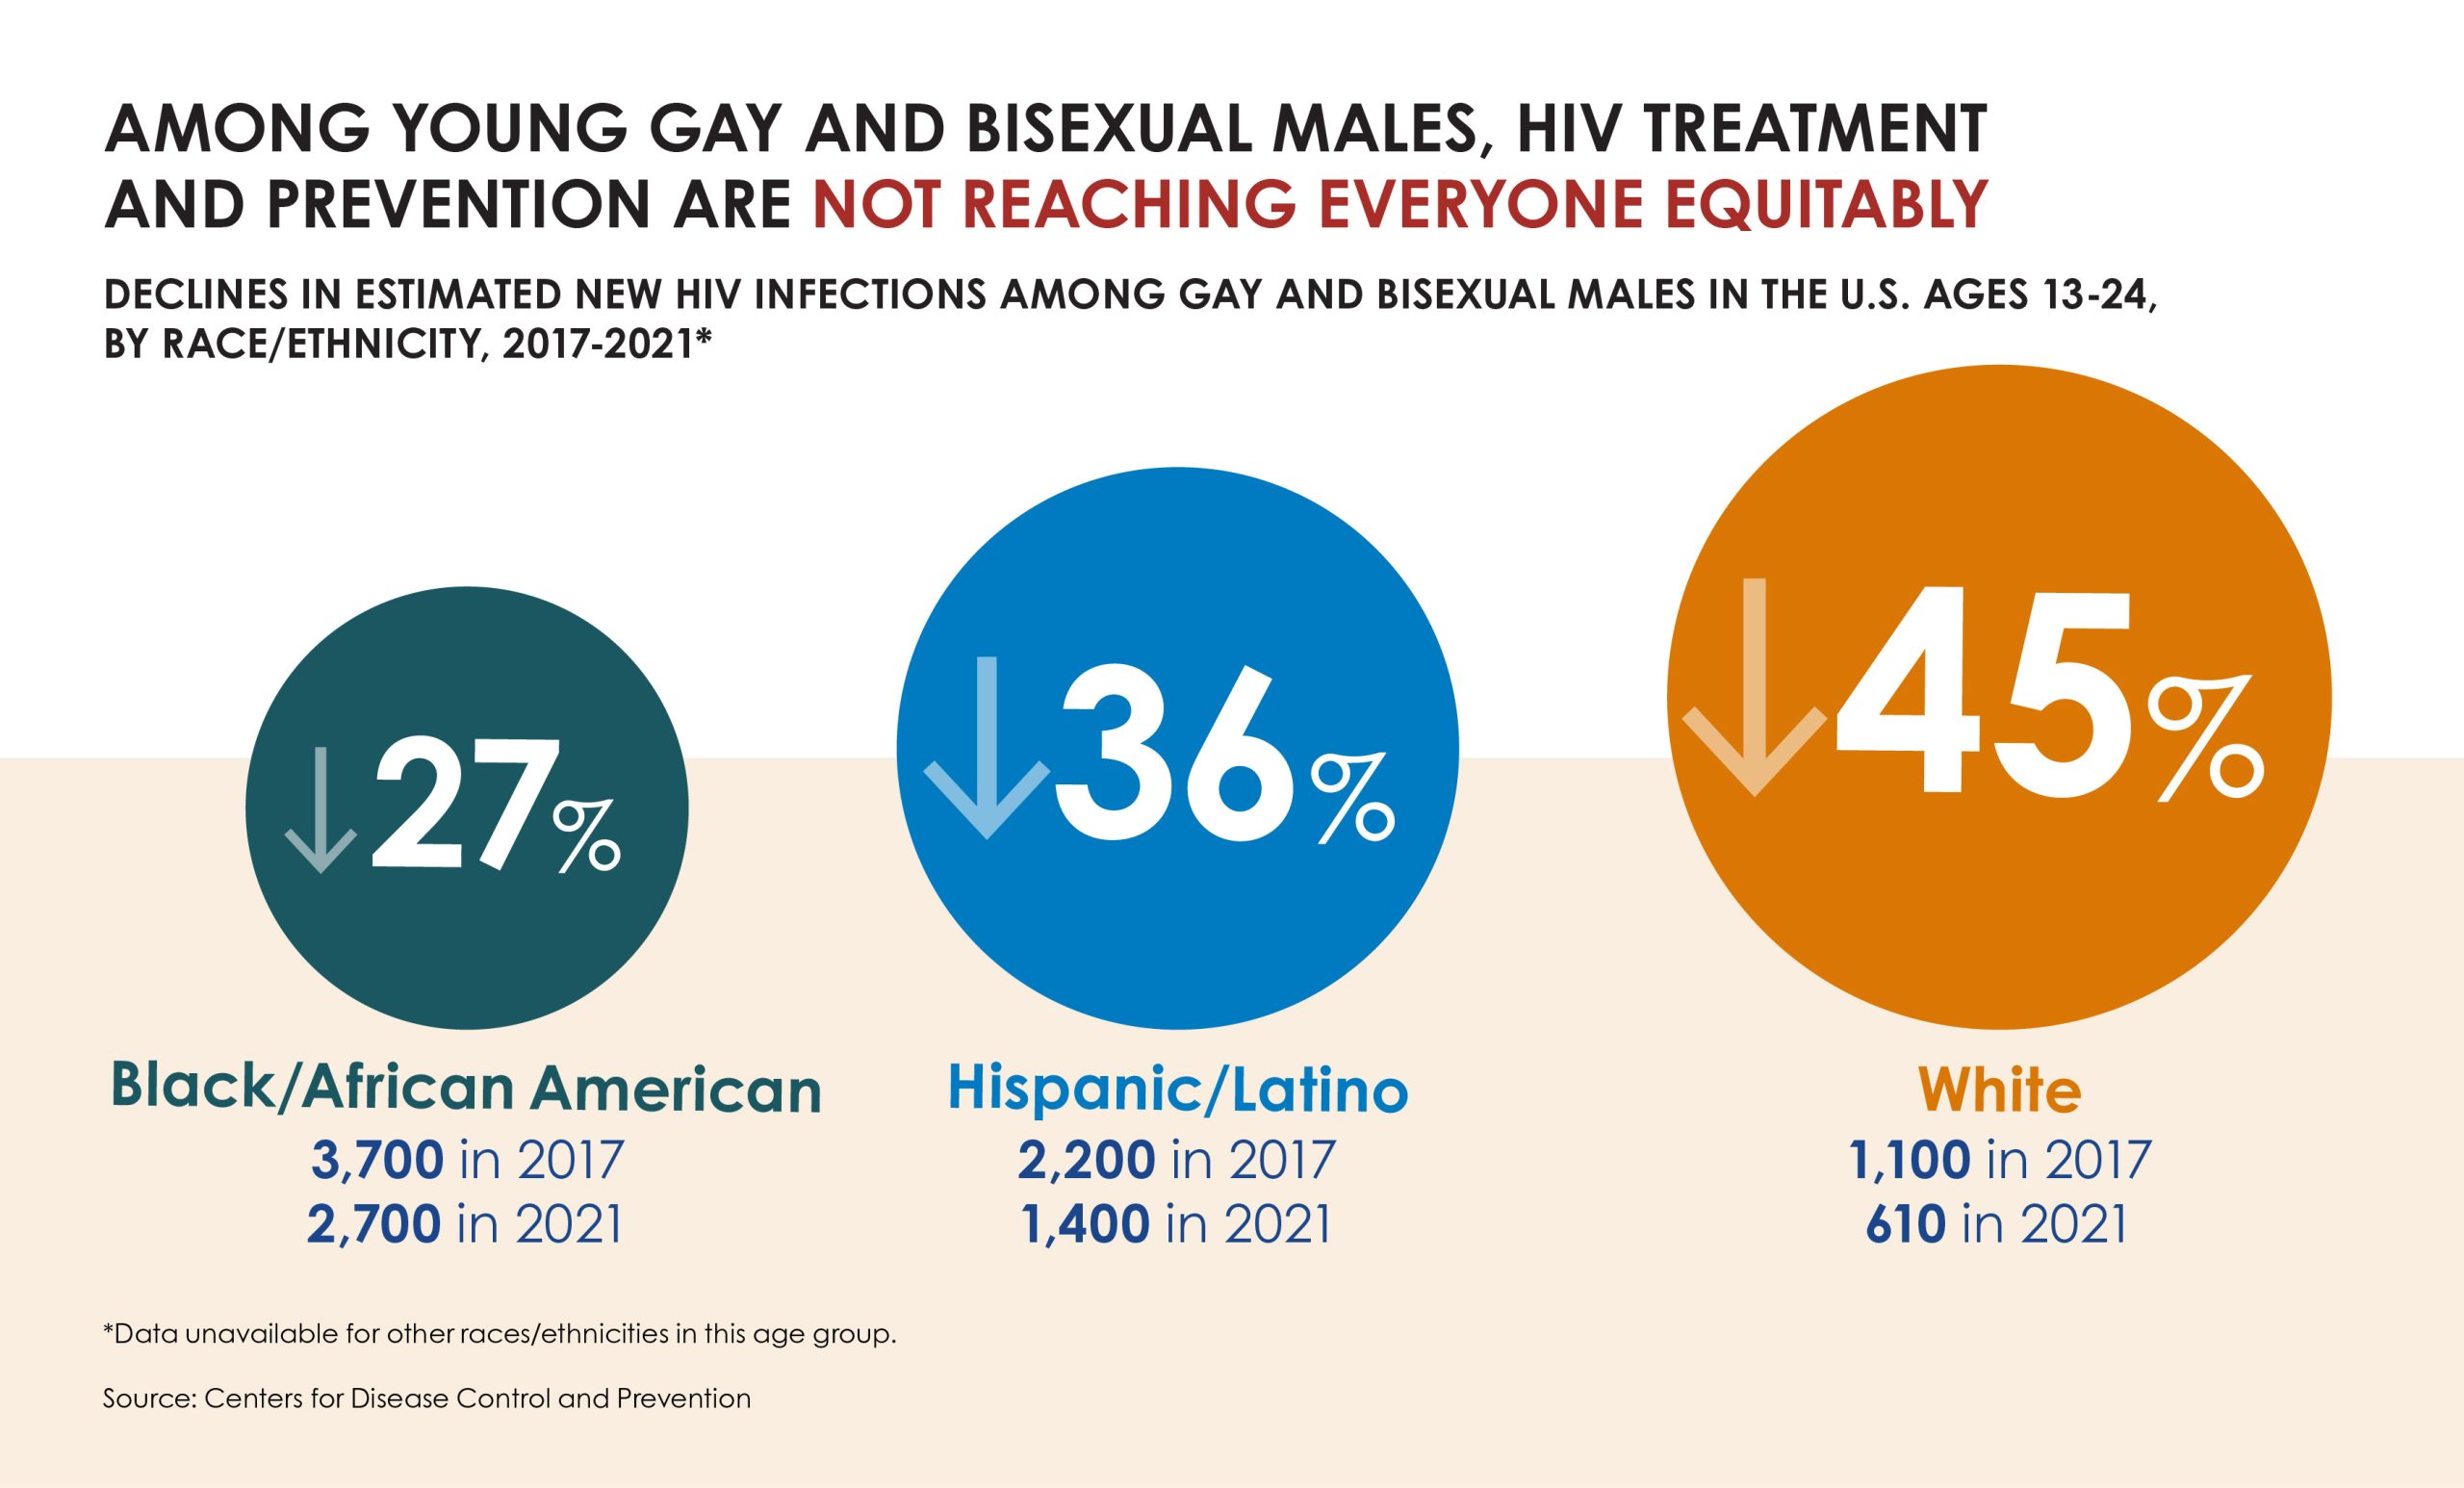 Young Men Who Have Sex With Men Lead Progress in HIV Prevention and Treatment, But Disparities Still Exist photo